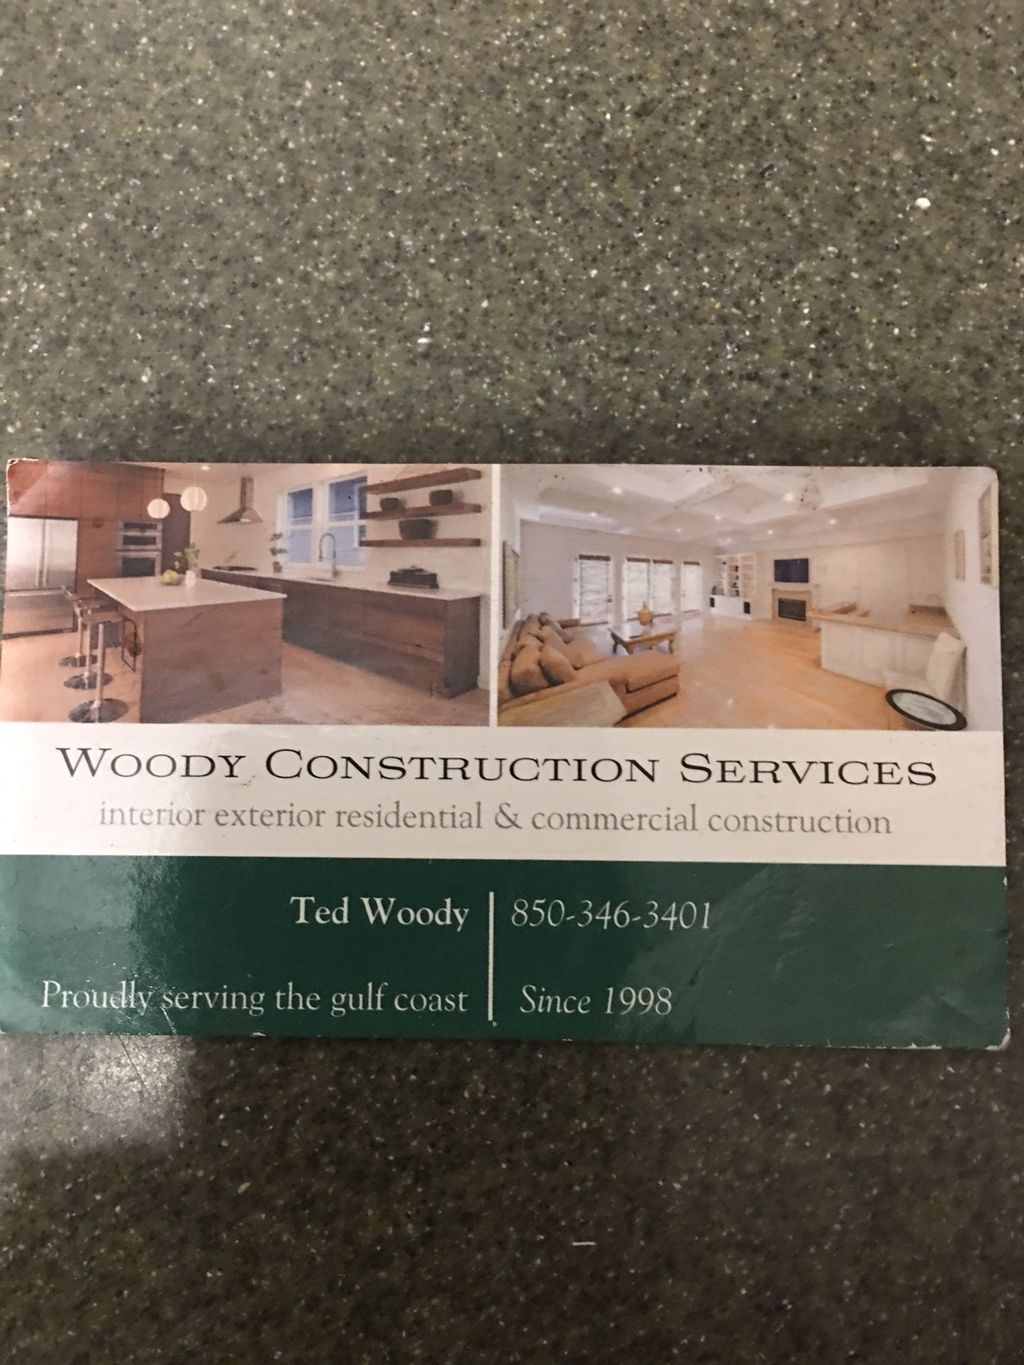 WOODY CONSTRUCTION and emergency 24 hr SERVICES